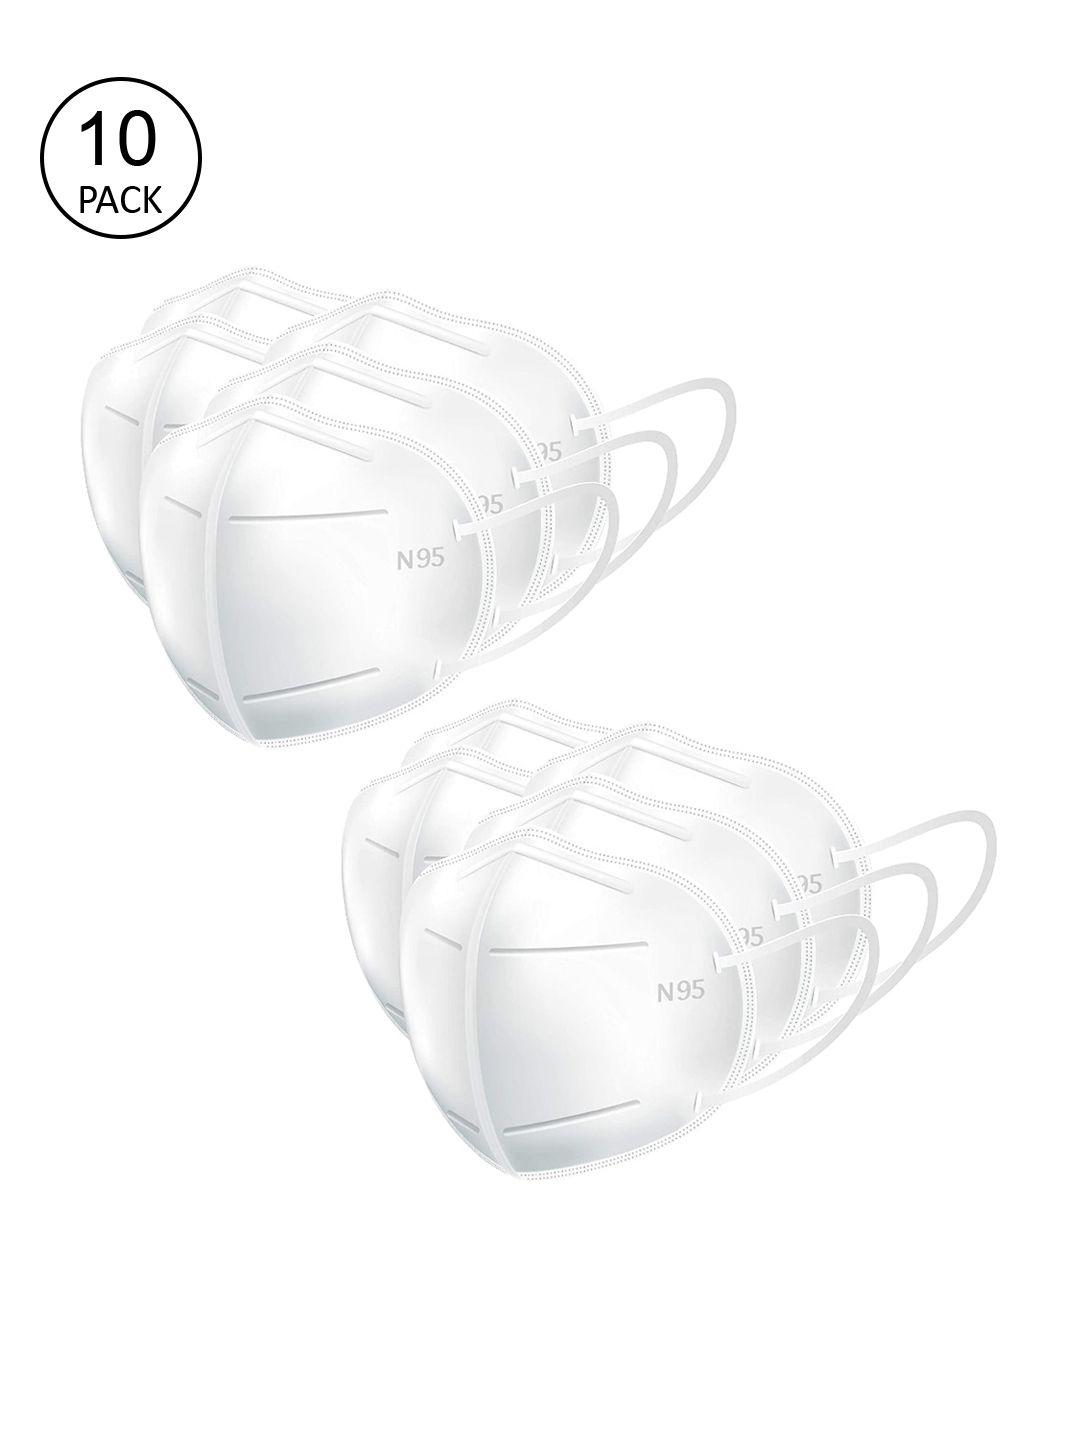 lioncrown unisex pack of 10 white solid 5-ply reusable n95 masks